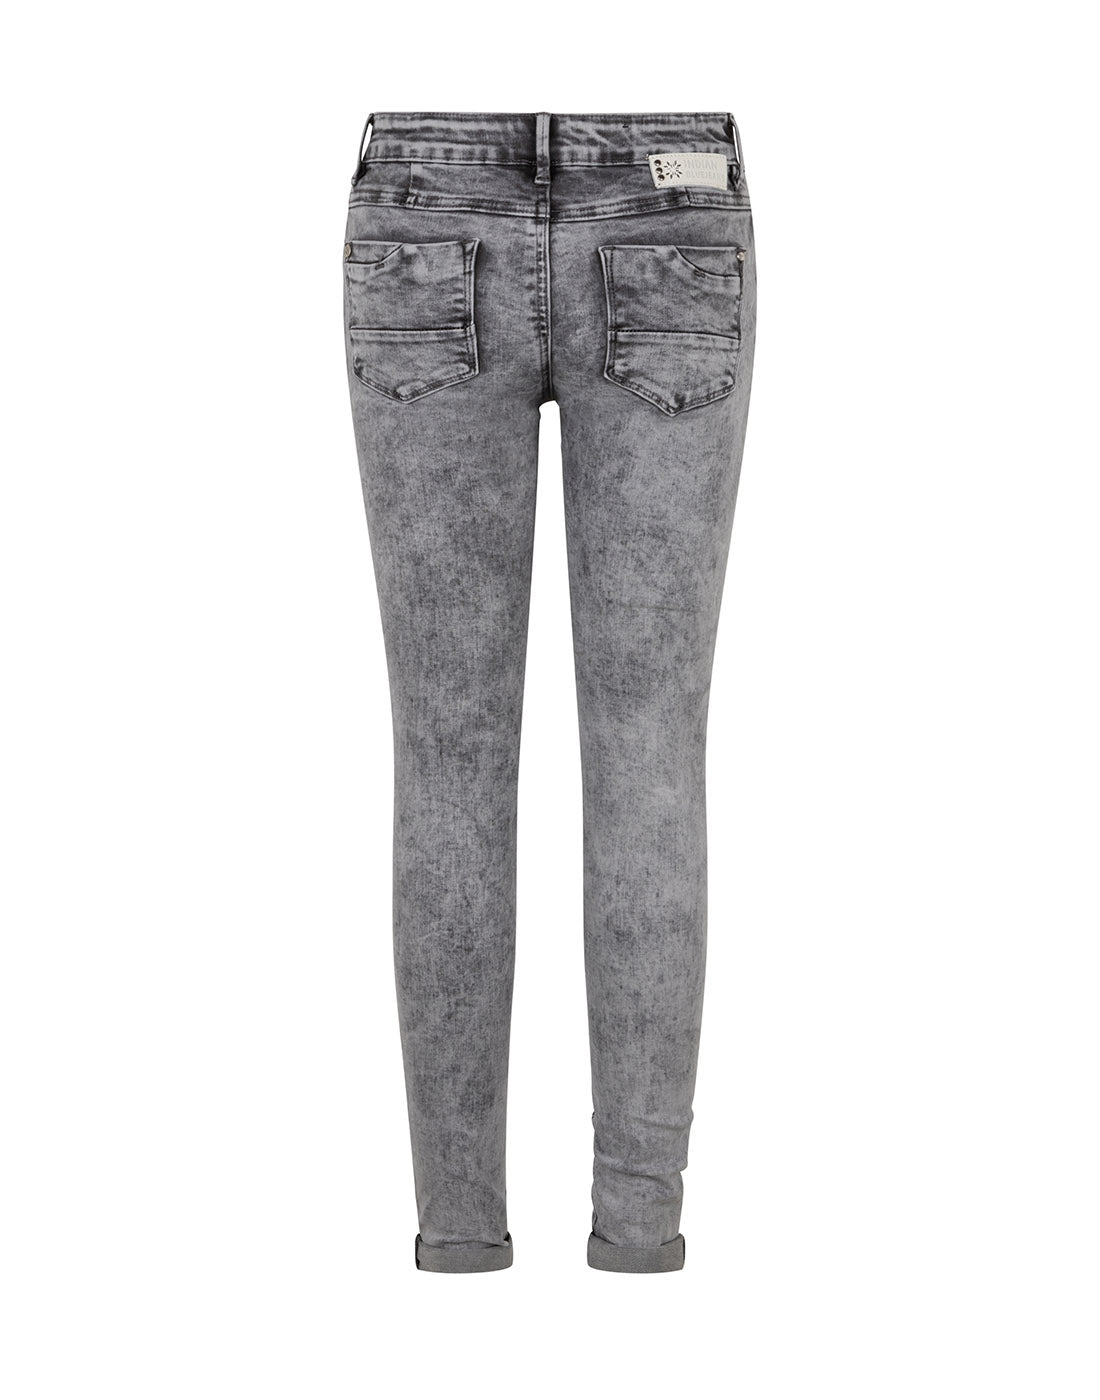 Indian Blue Jeans GRAY JAZZ SUPER SKINNY FIT